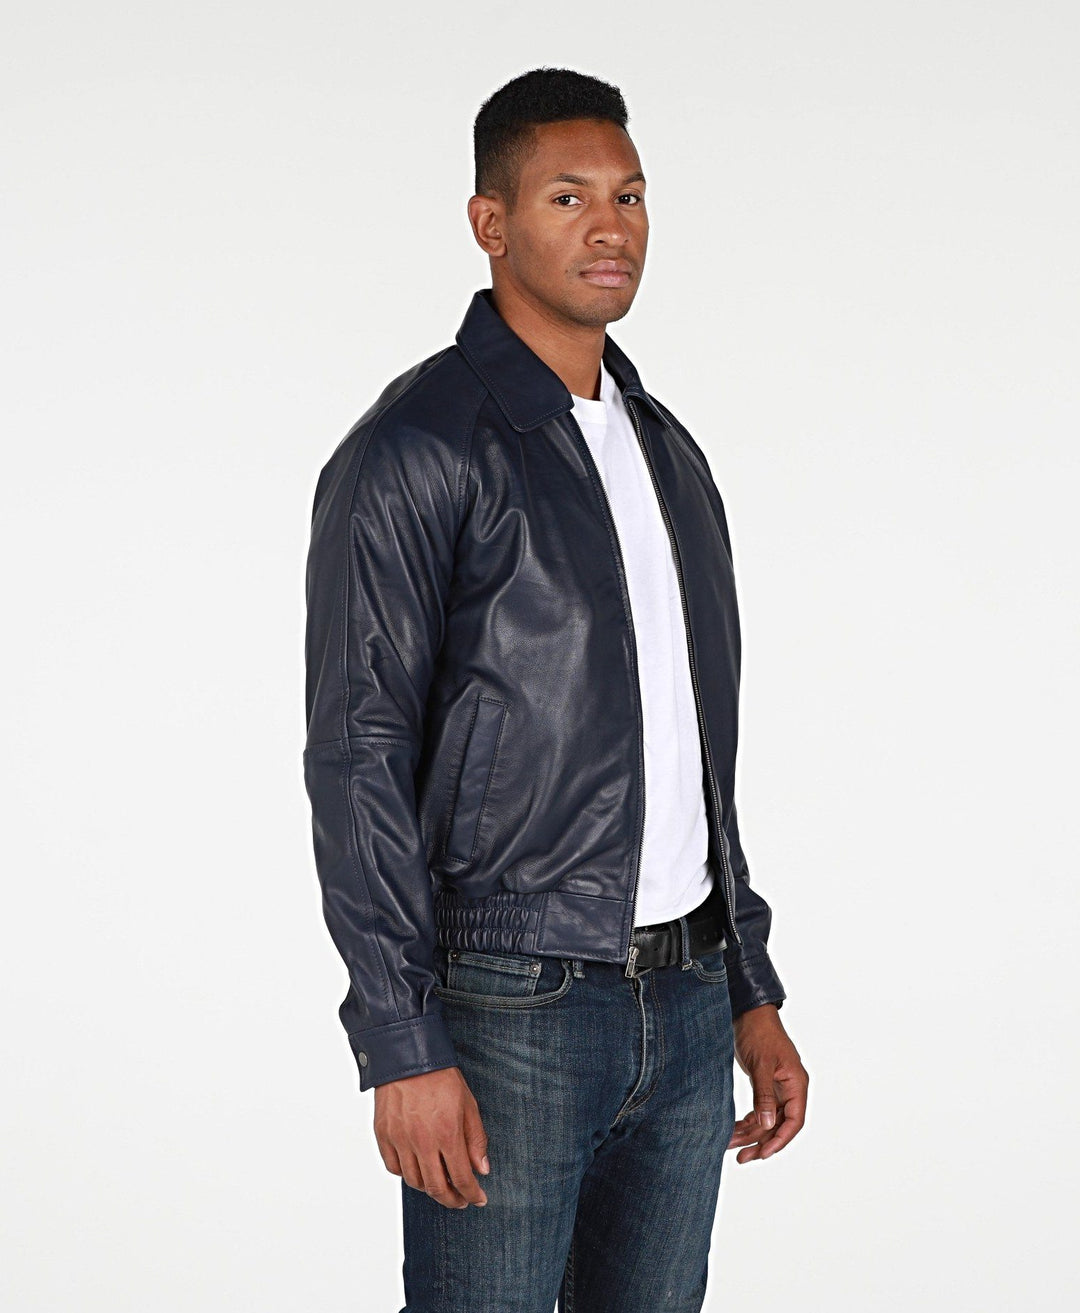 Asher Mens Leather Jacket – FAD